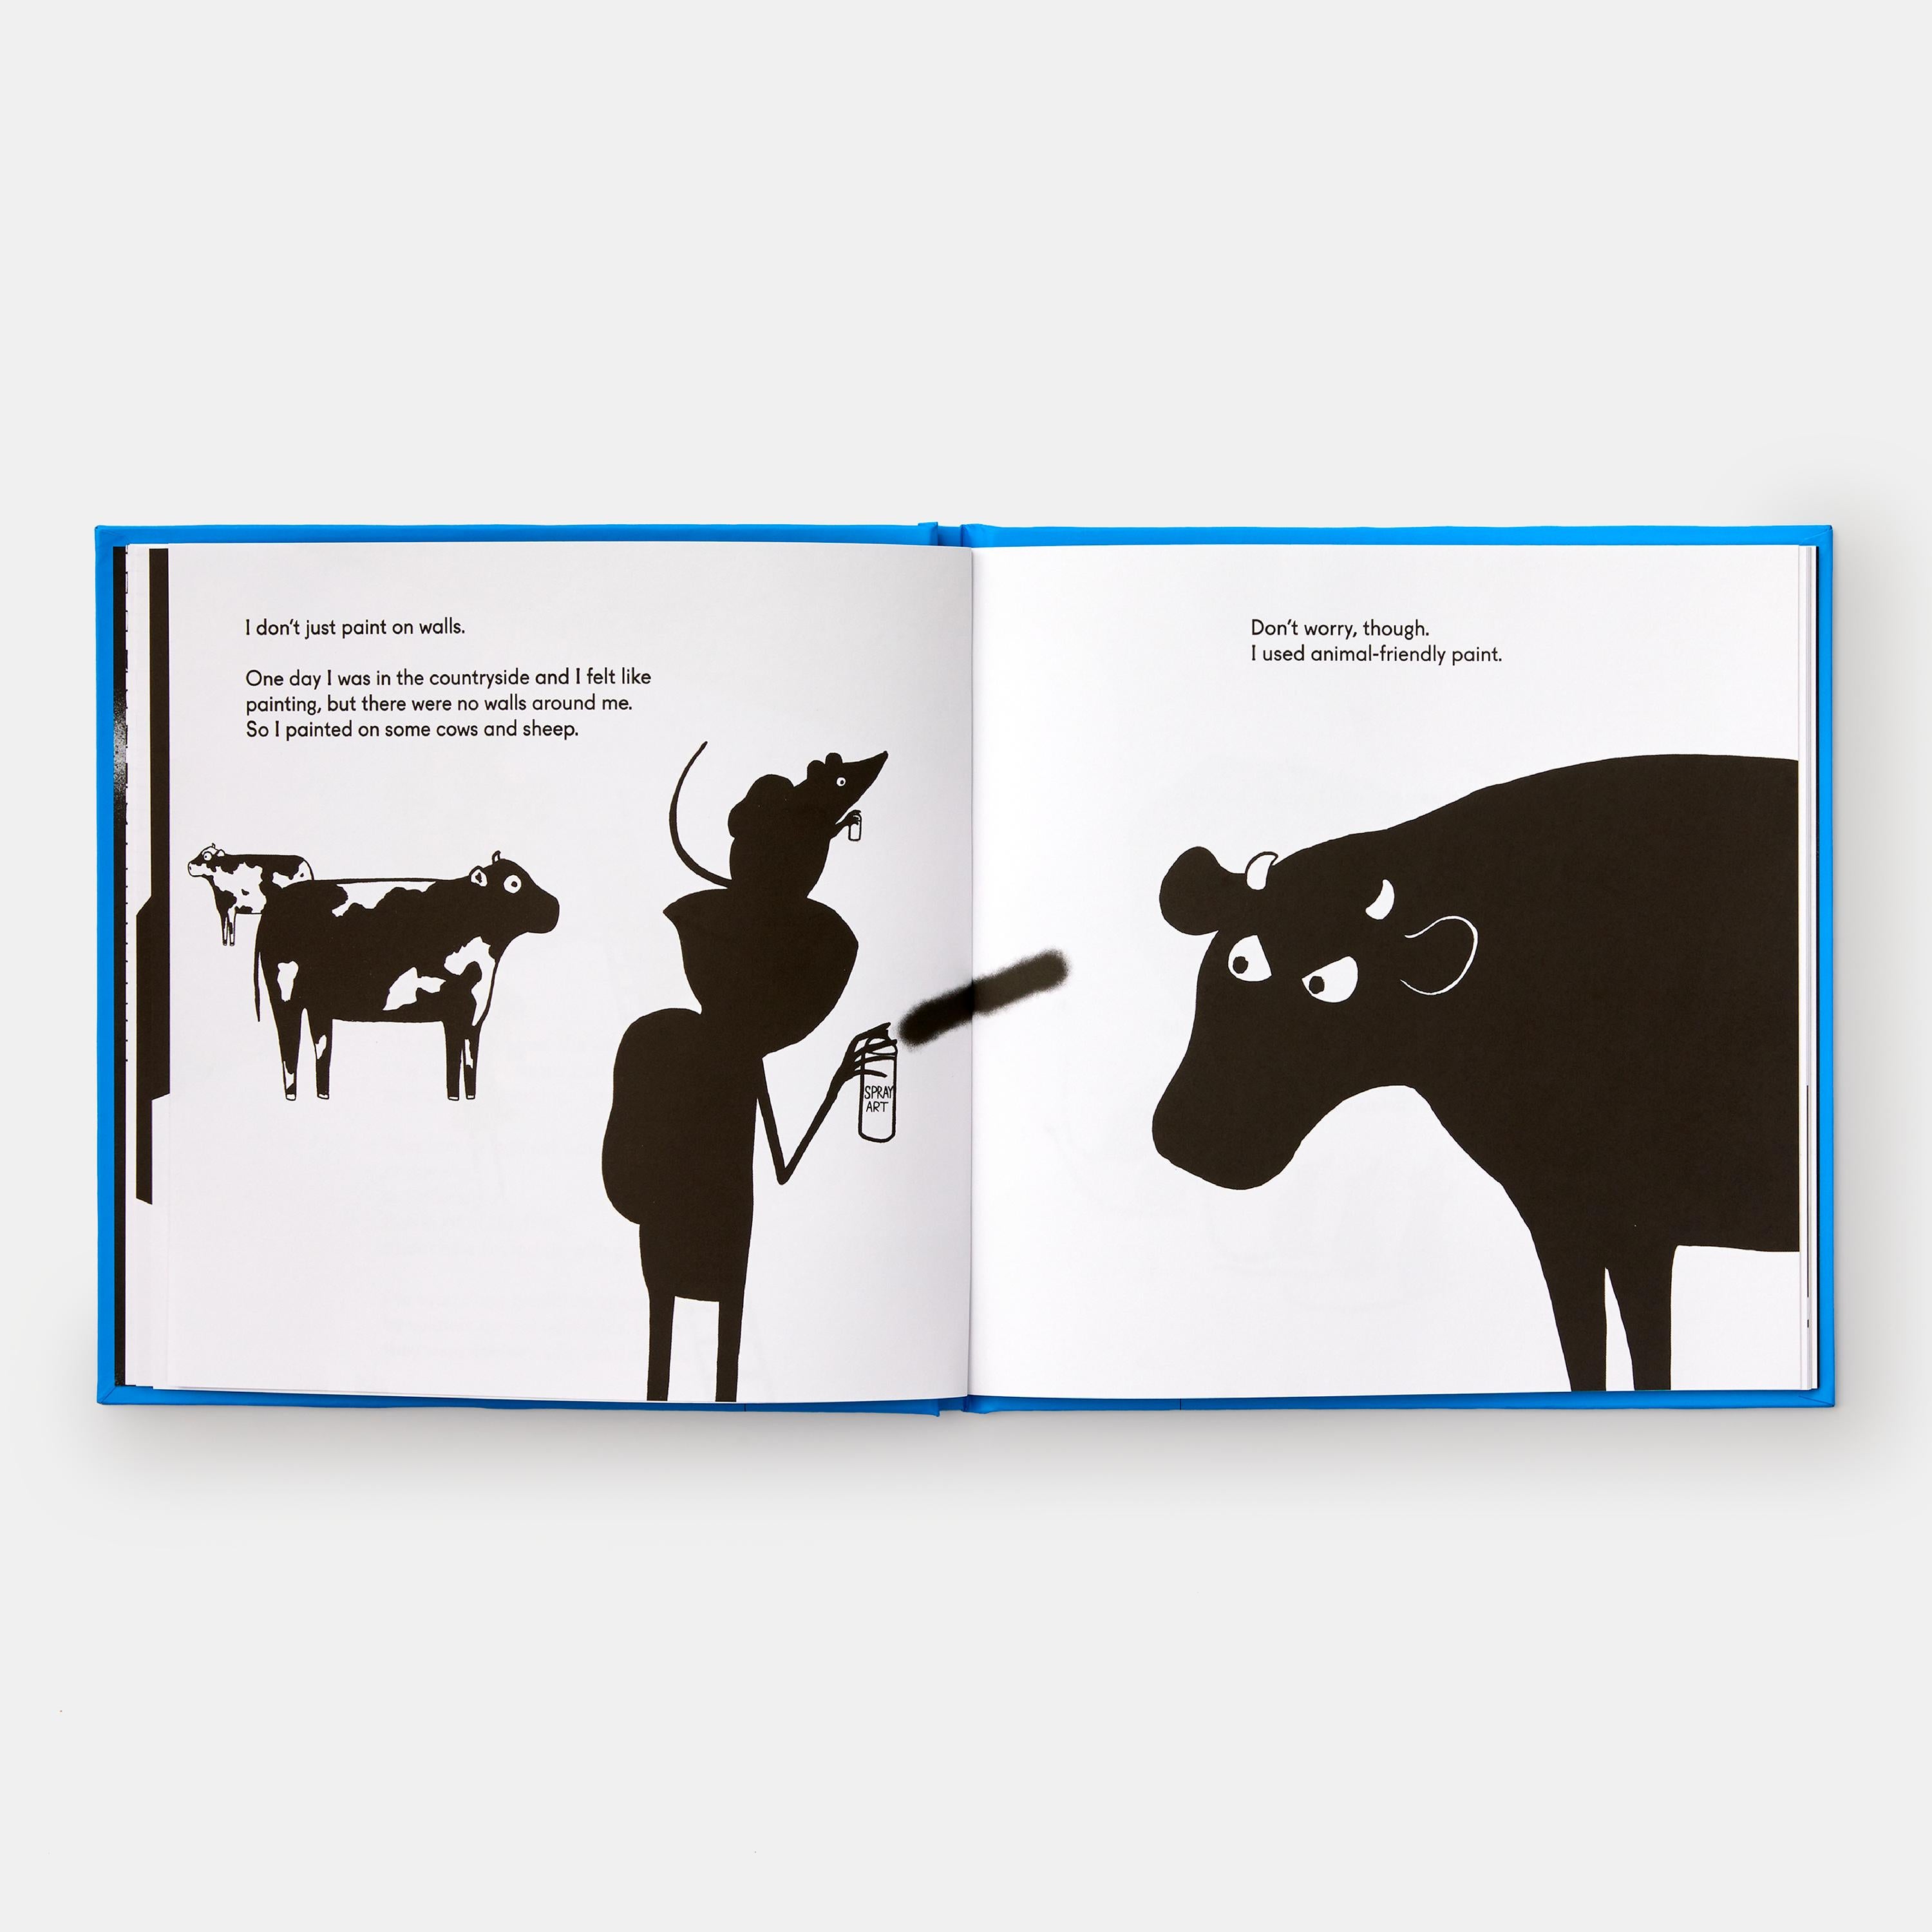 Contemporary Banksy Graffitied Walls and Wasn’t Sorry Book For Sale